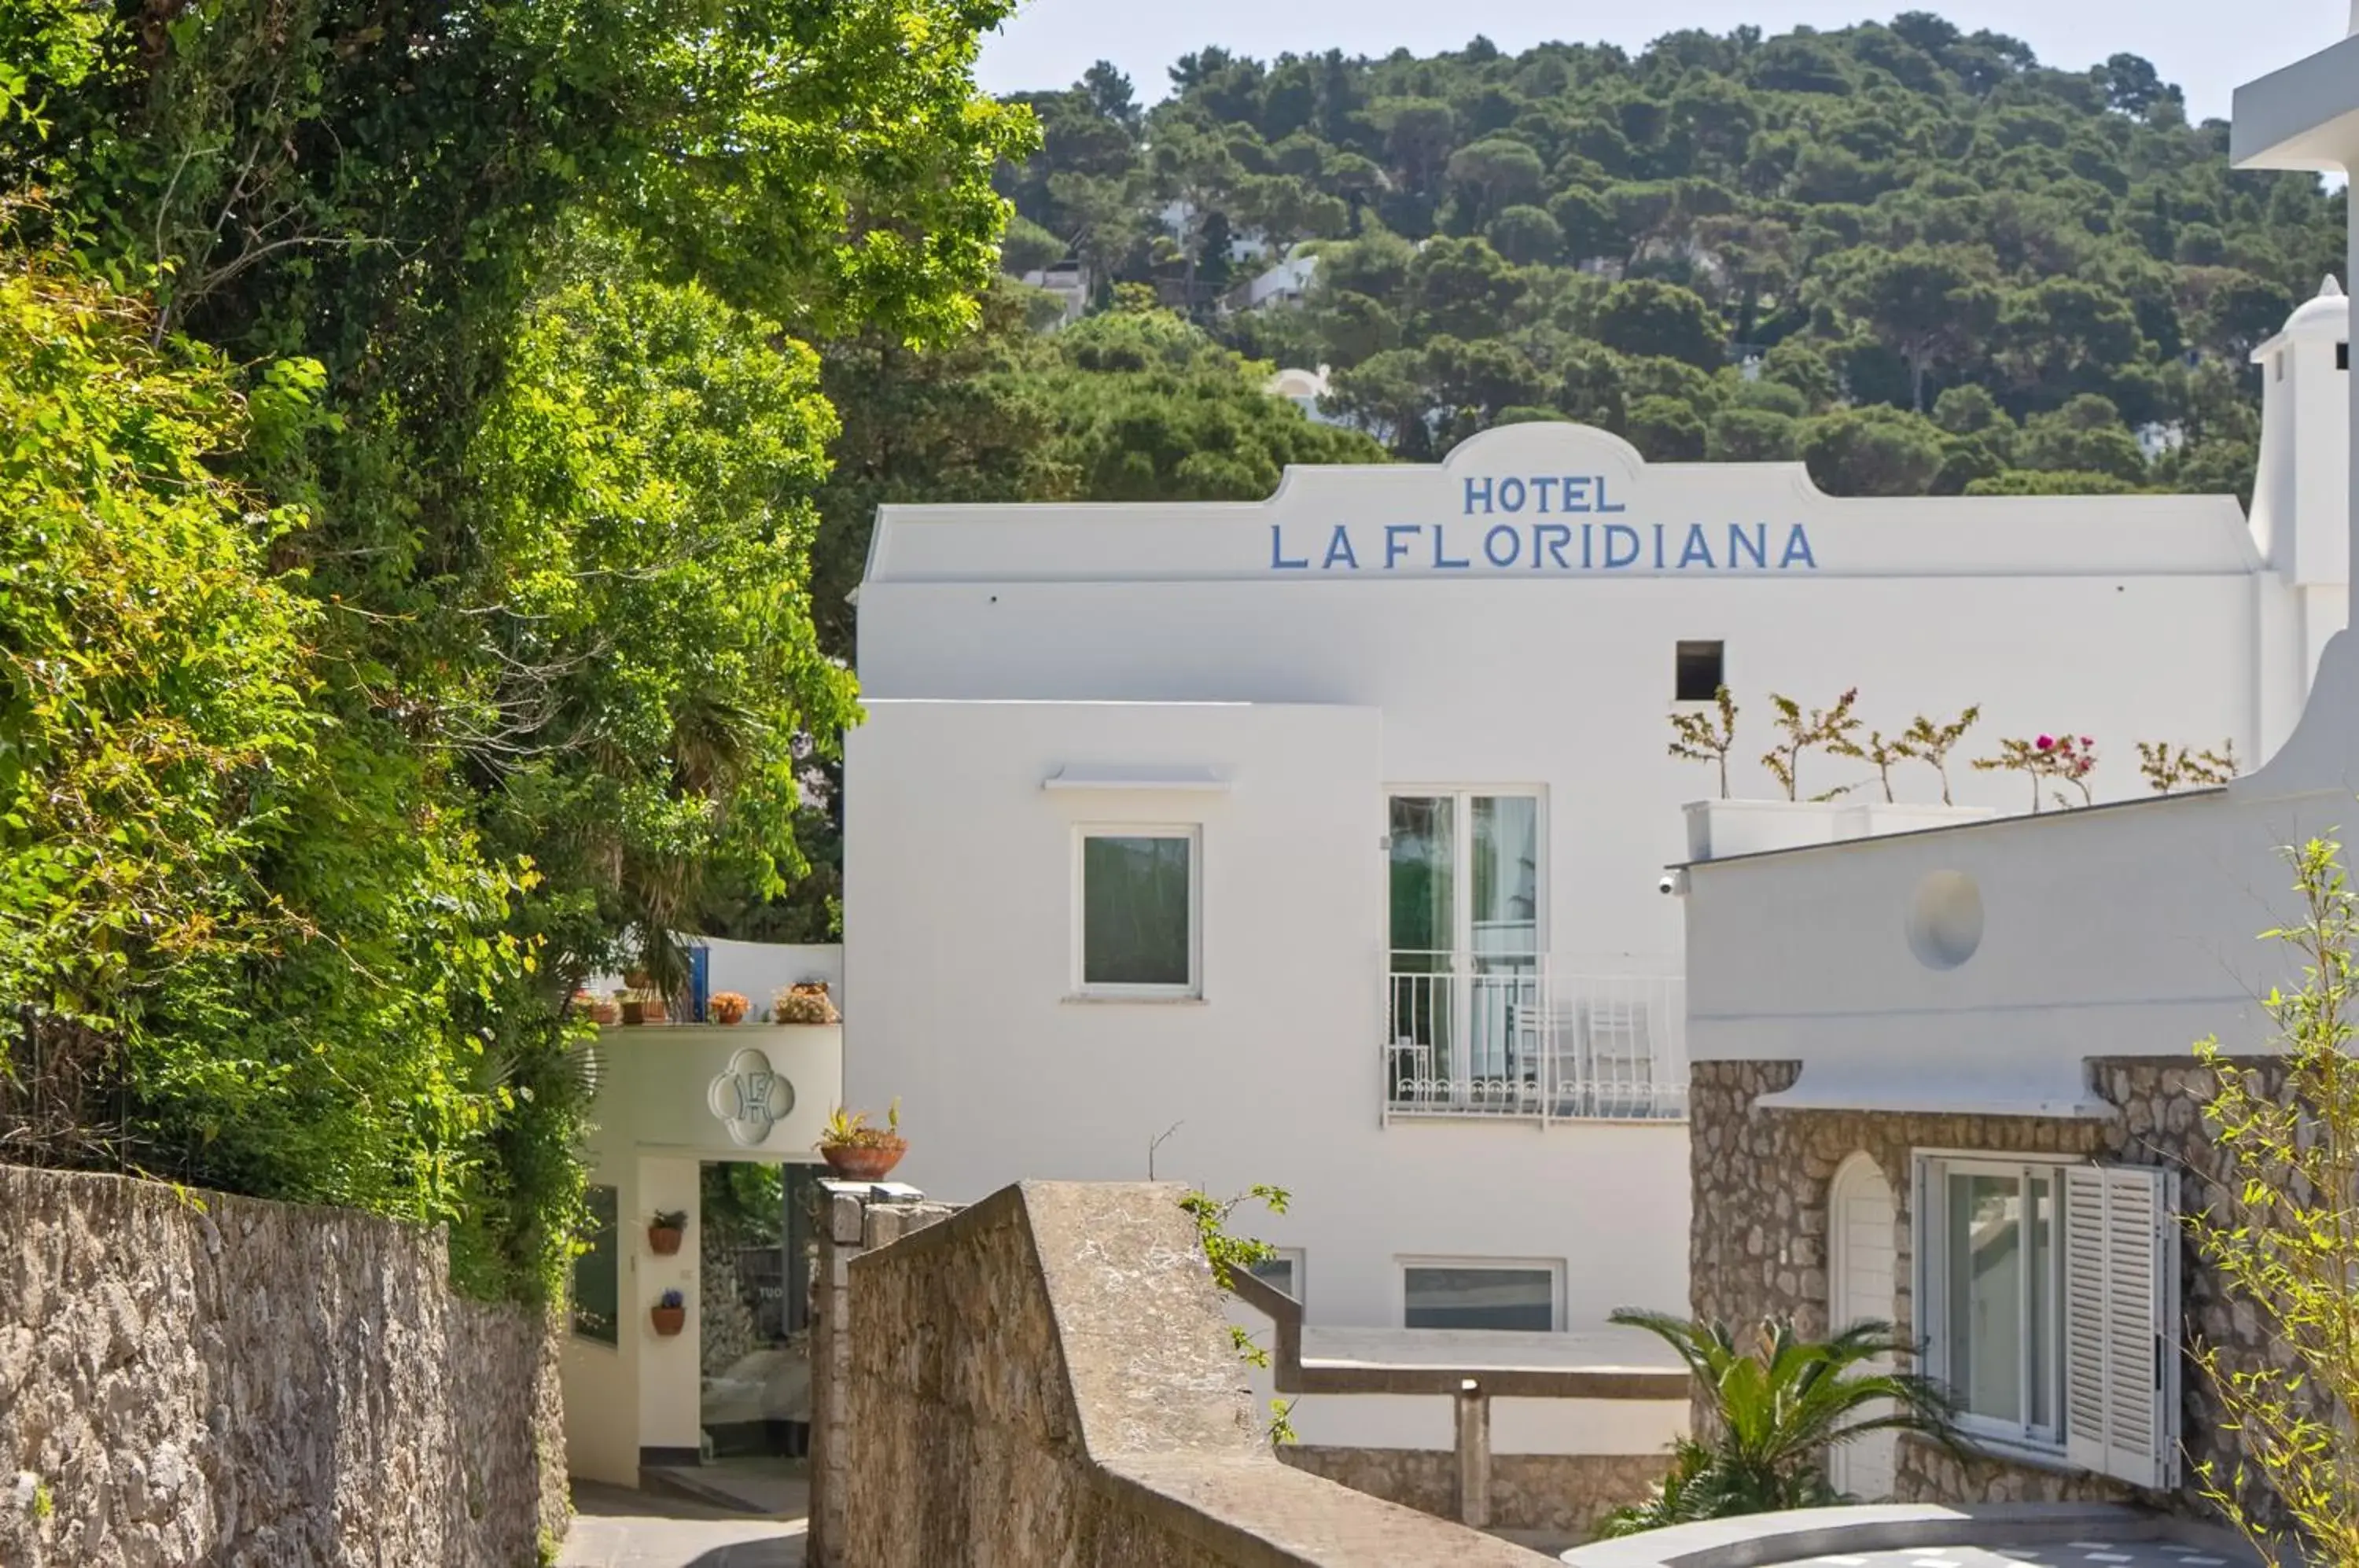 Property building in Hotel La Floridiana